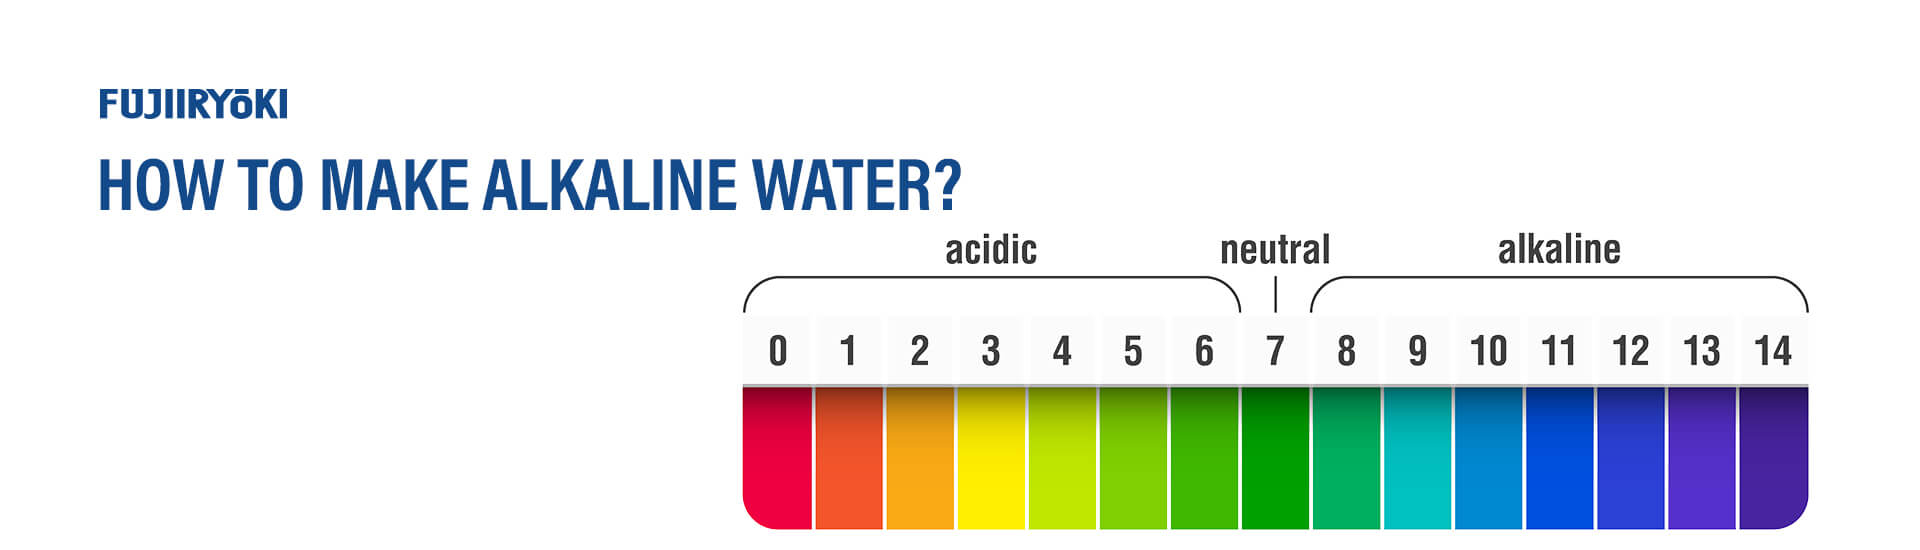 How to Make Alkaline Water at Home?